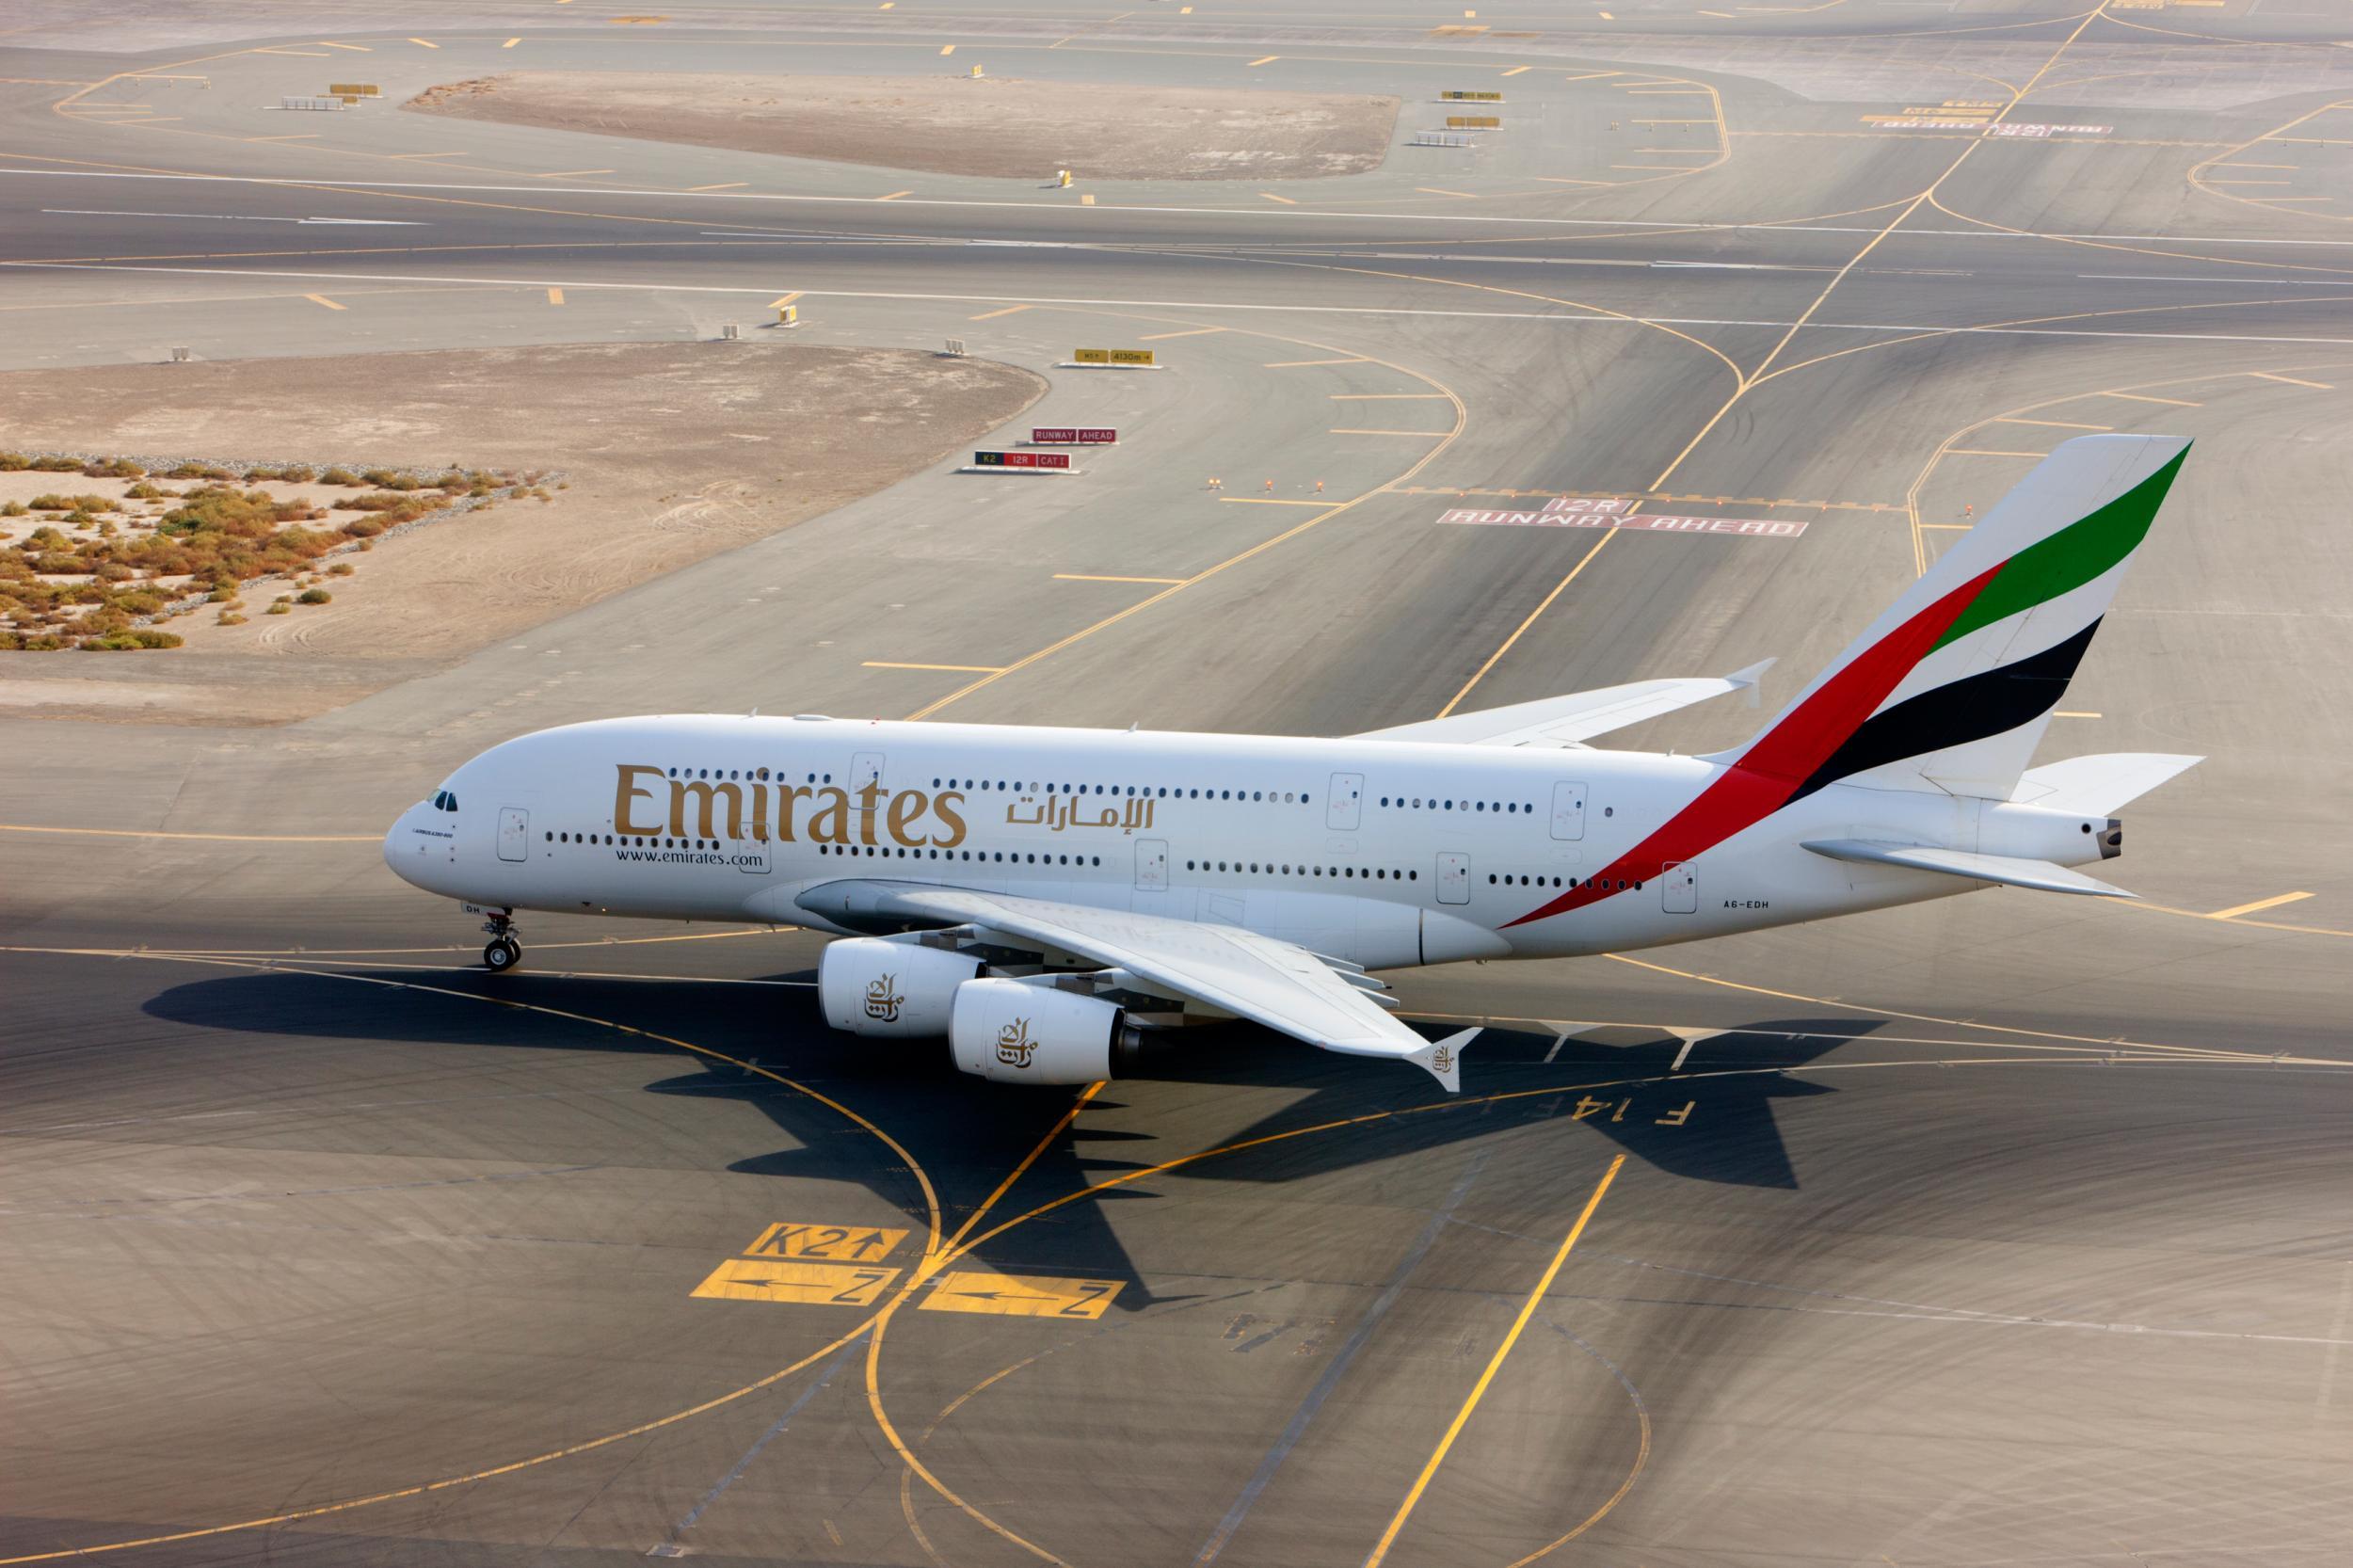 Emirates is the largest operator of the A380